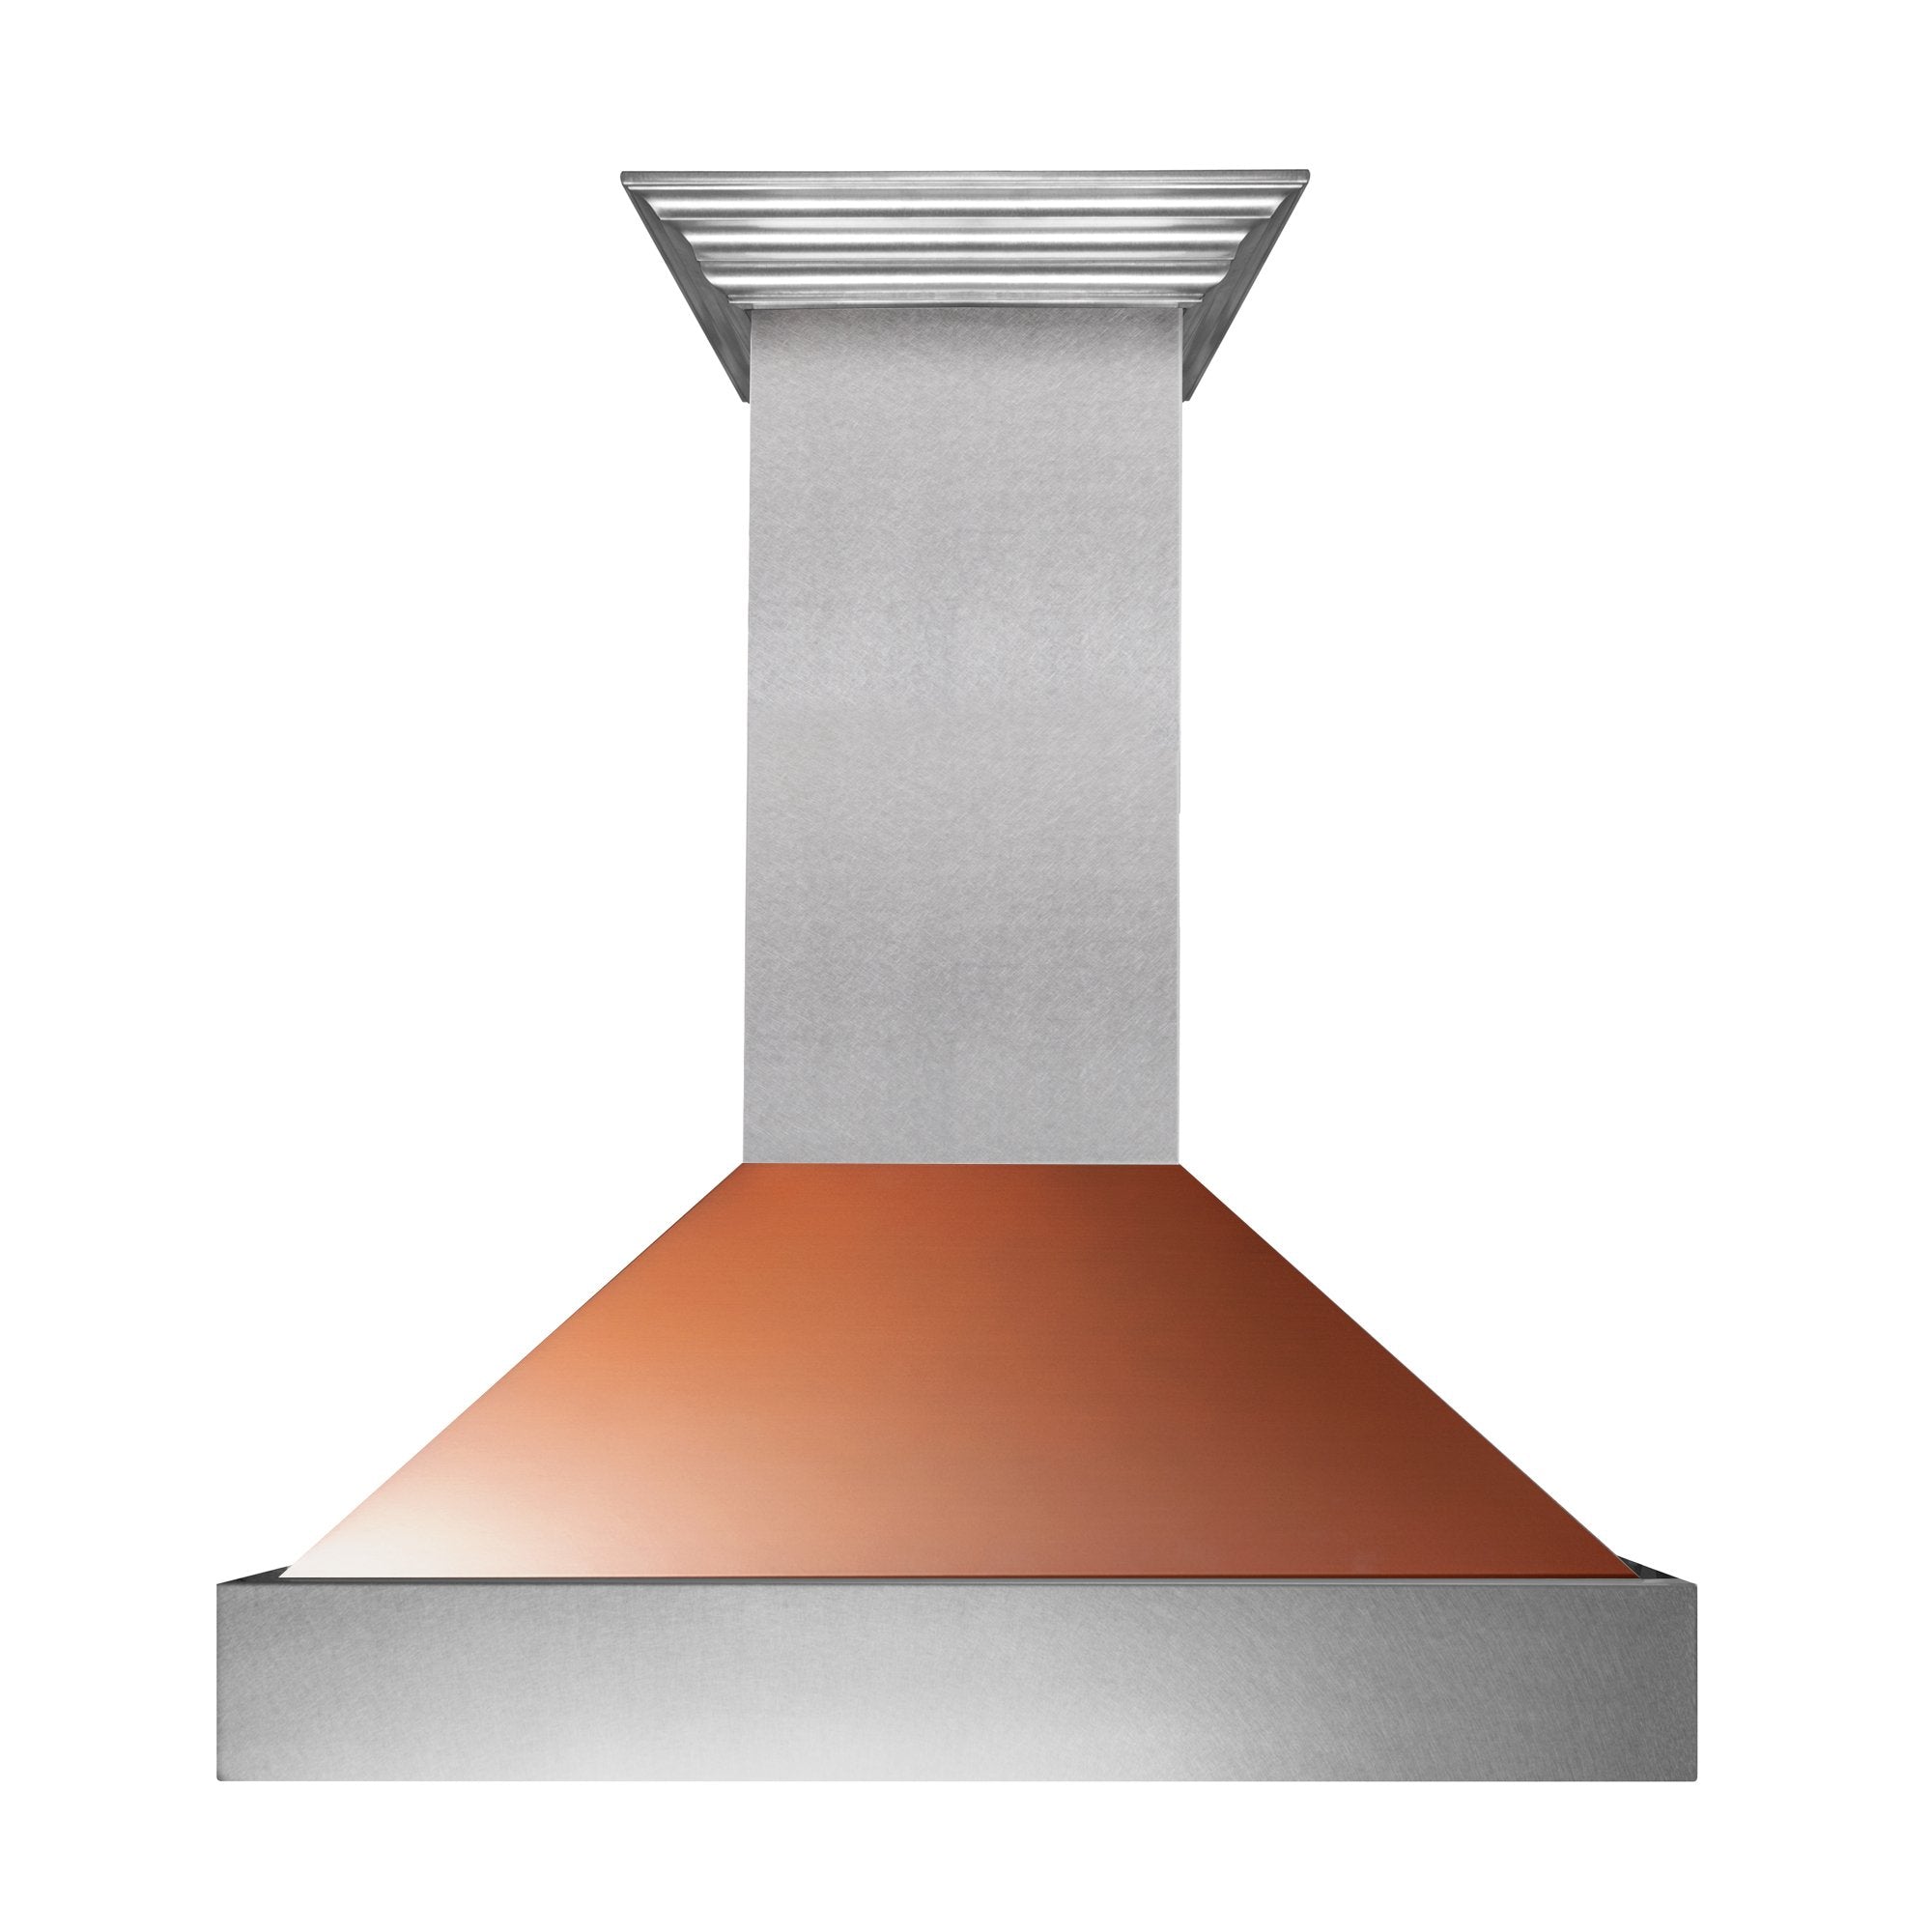 30" Ducted Fingerprint Resistant Stainless Steel Range Hood with Copper Shell (8654C-30)